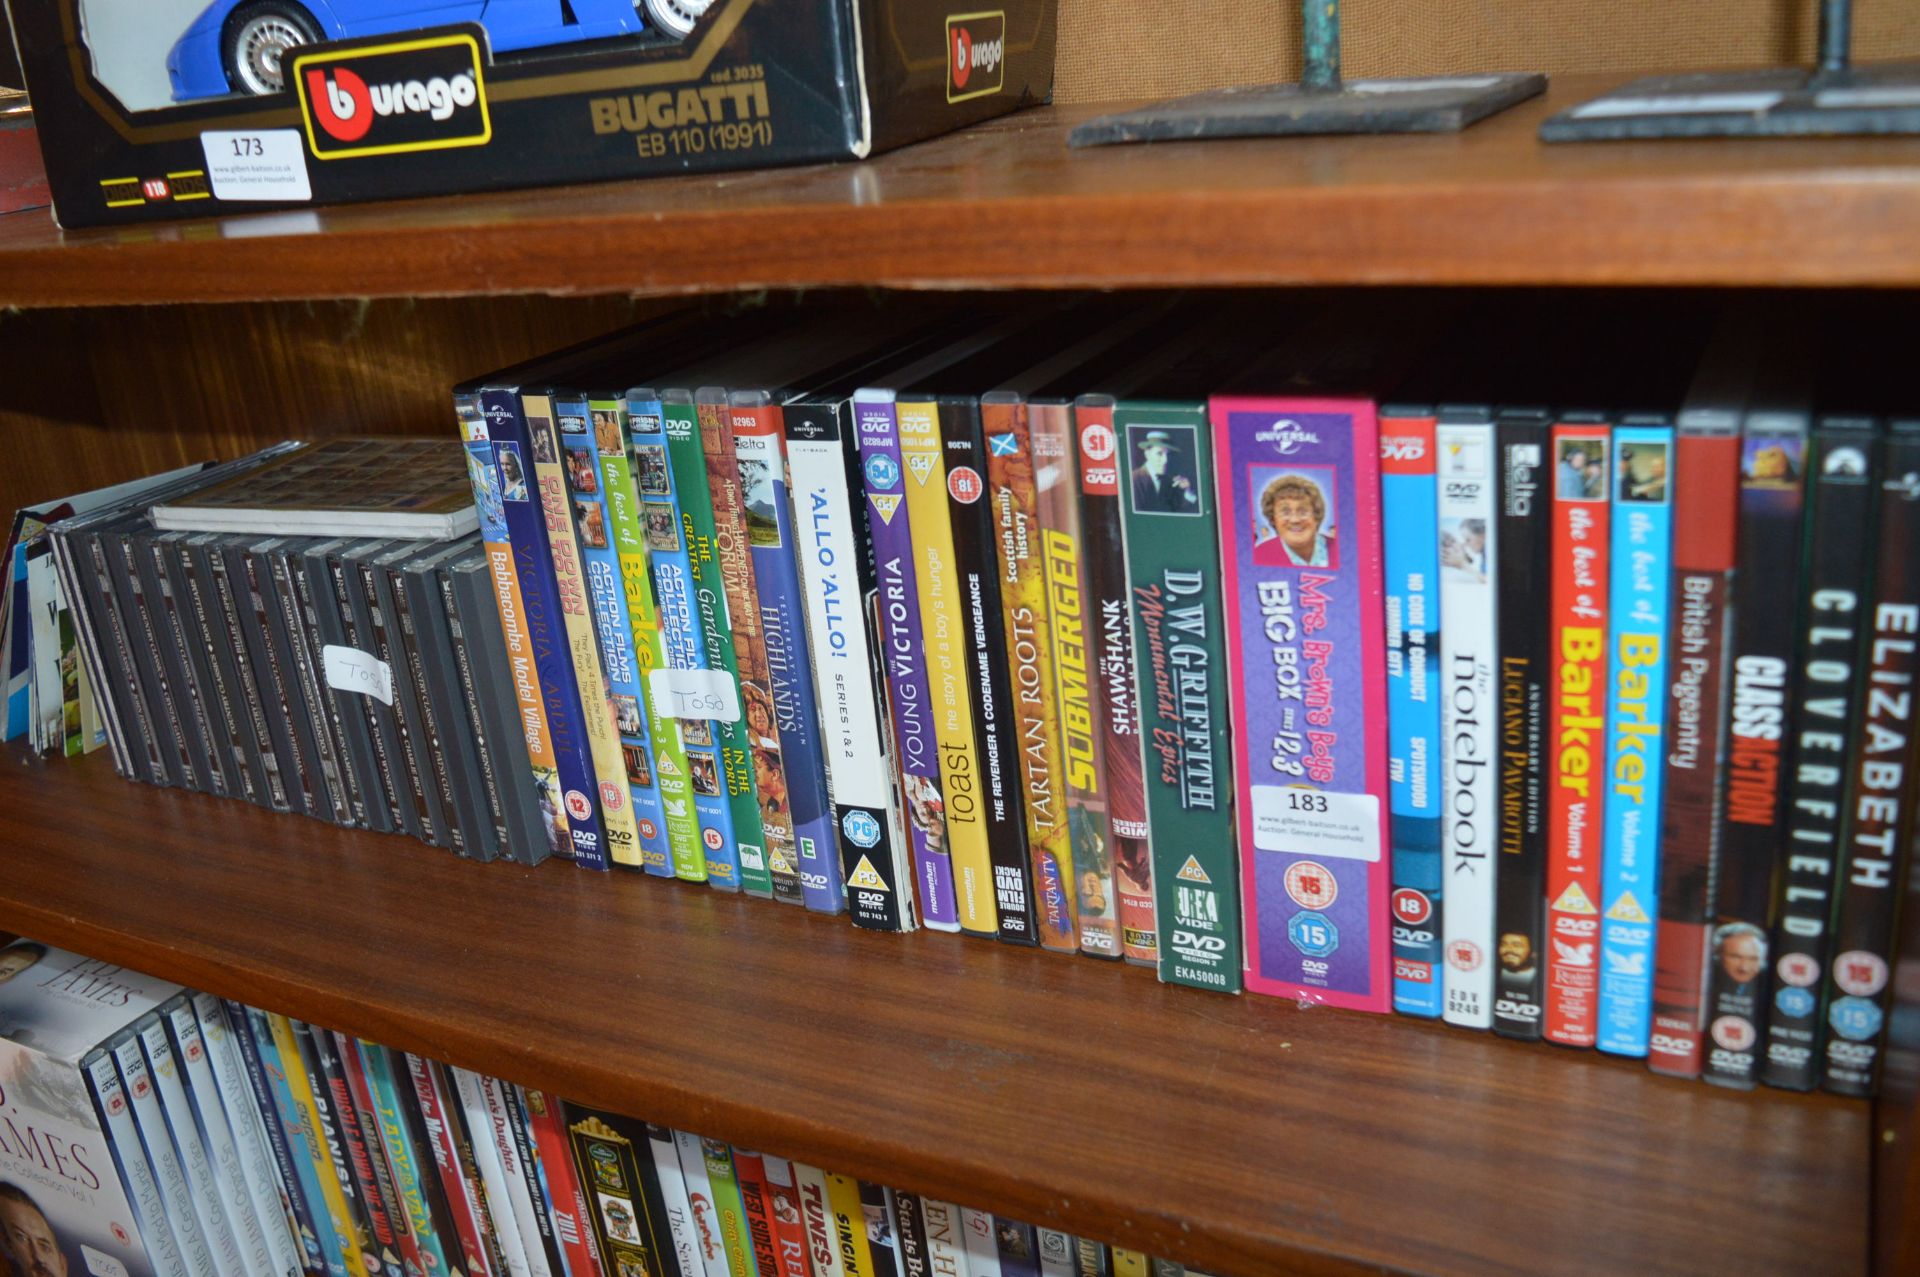 Collection of DVDs and CDs